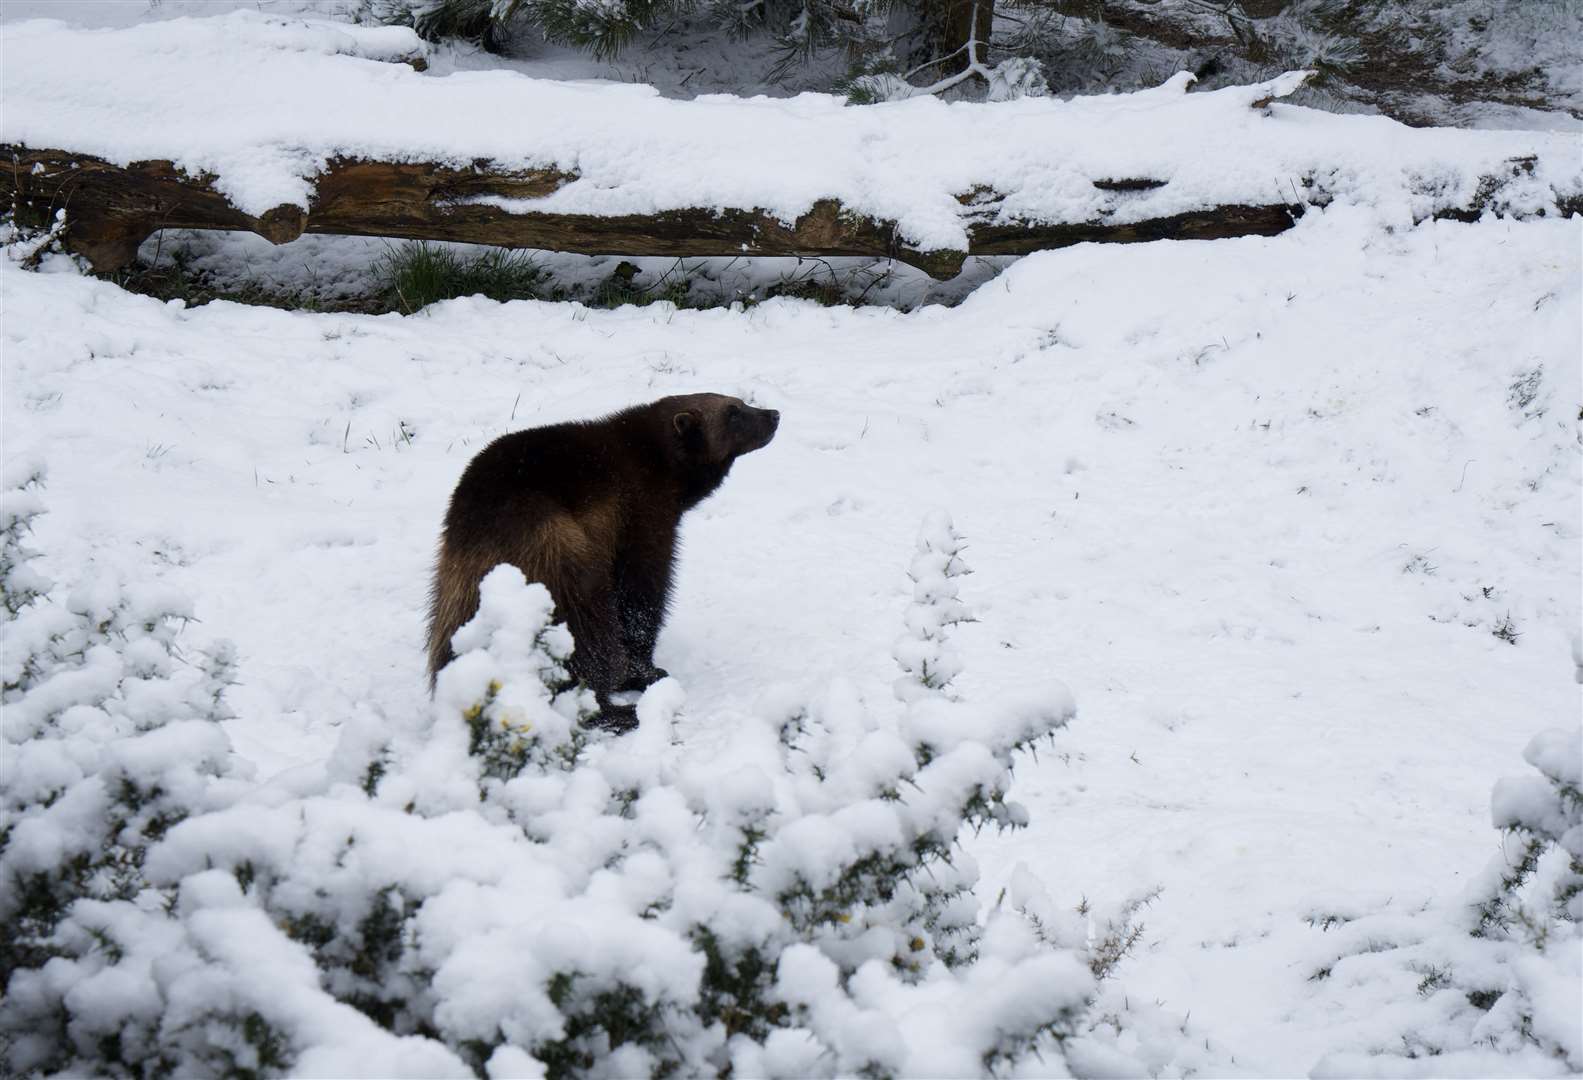 Puff the wolverine enjoying the snow at Whipsnade Zoo (Whipsnade Zoo/PA)